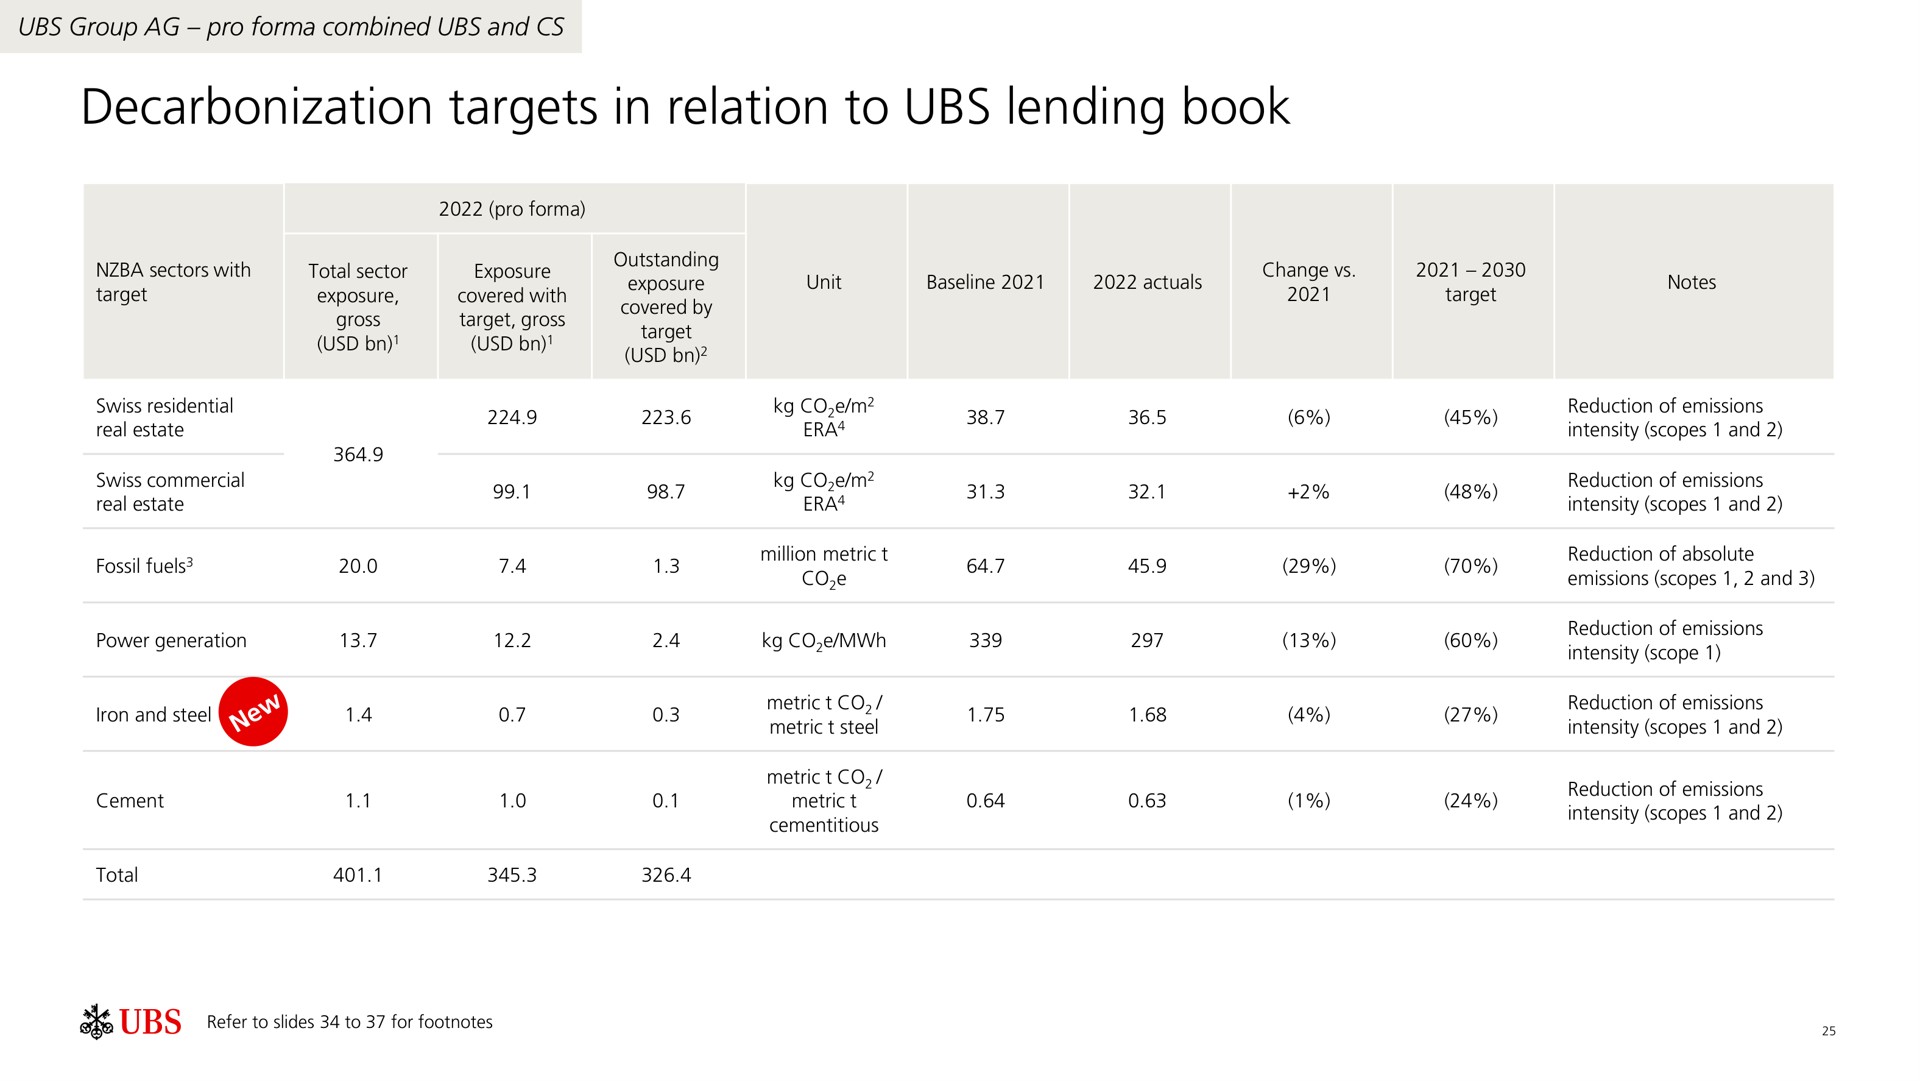 decarbonization targets in relation to lending book | UBS